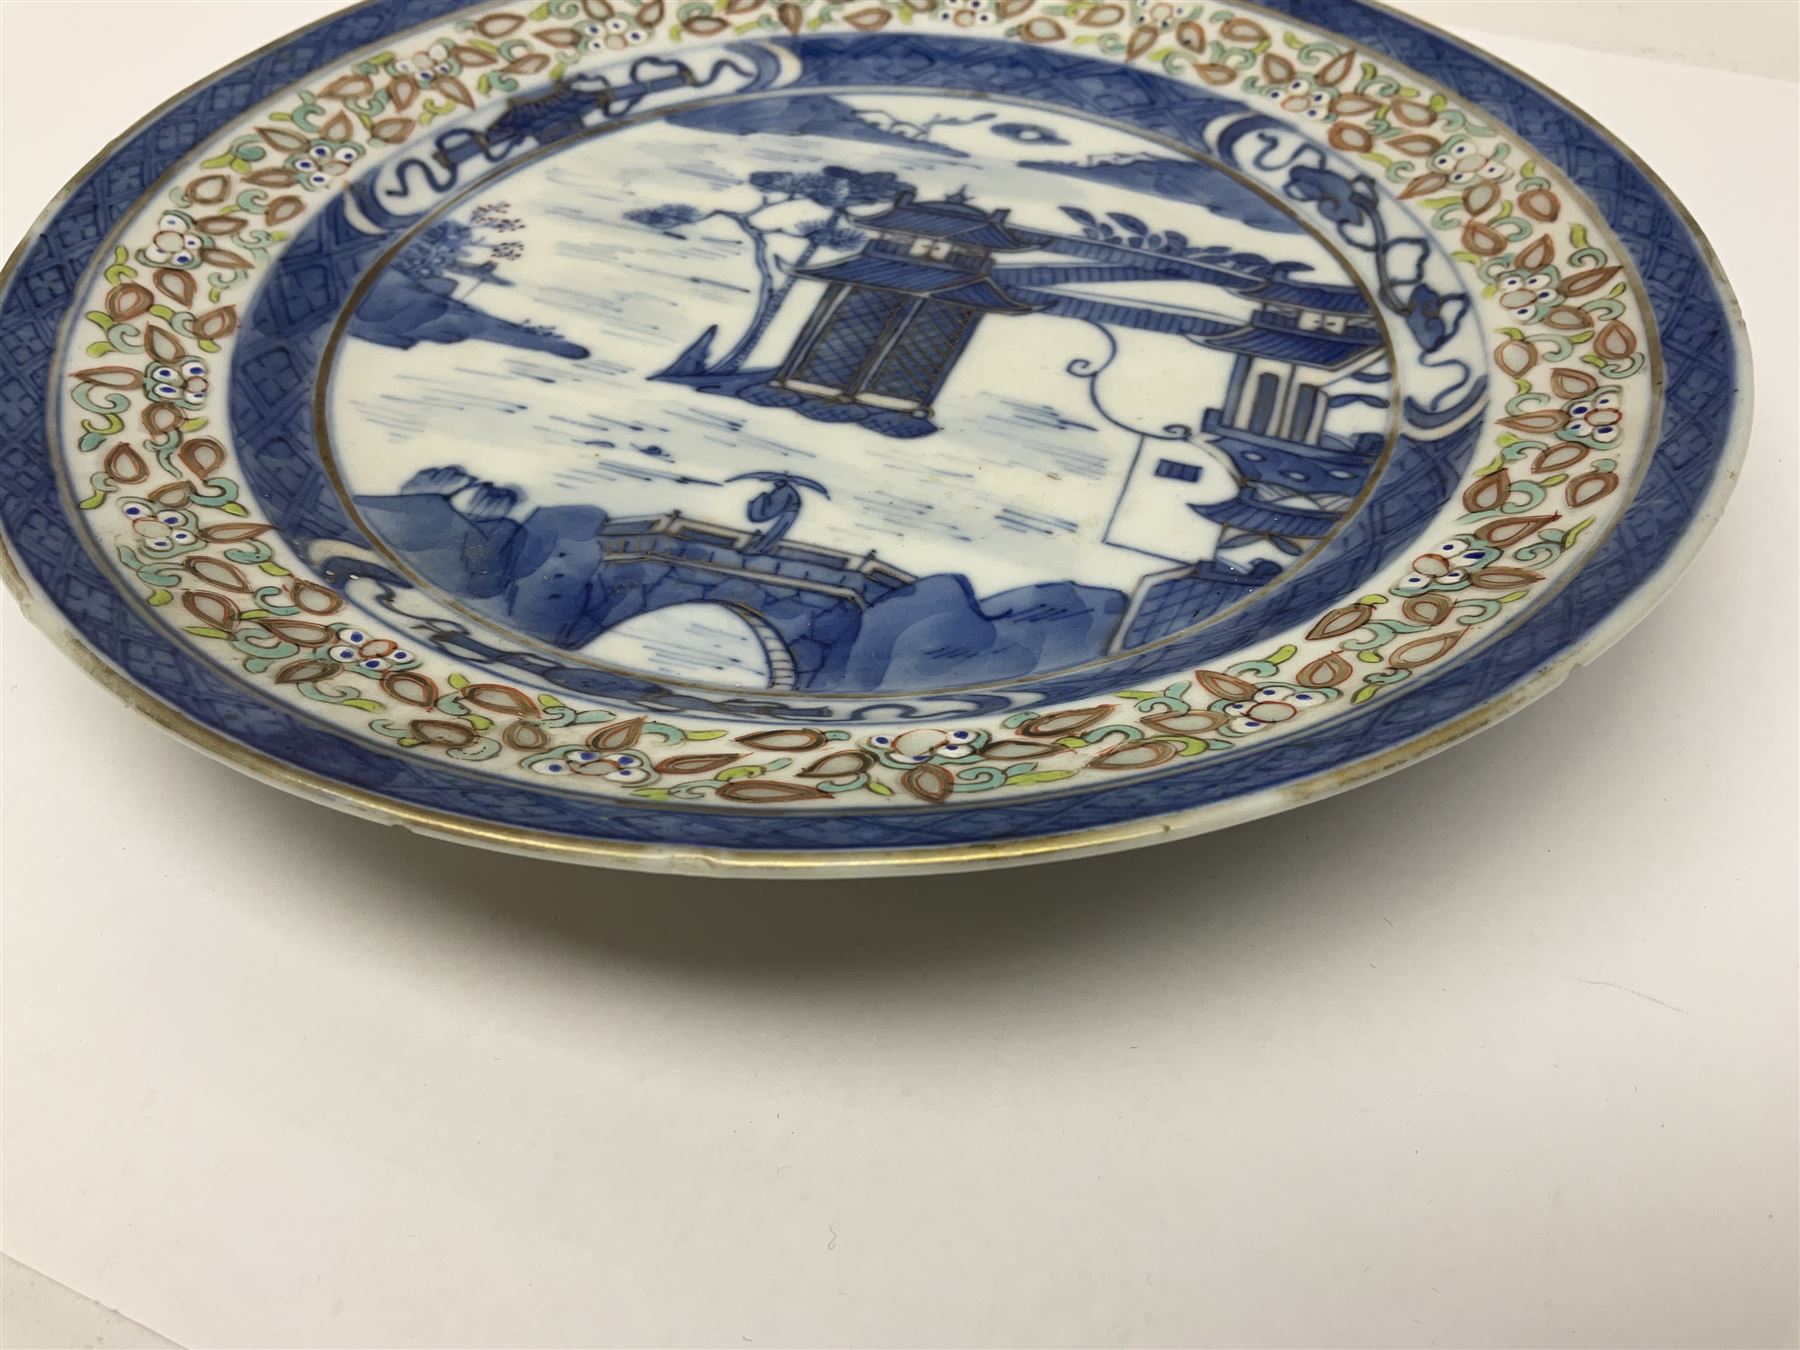 Late 19th century Chinese rice plate - Image 3 of 8